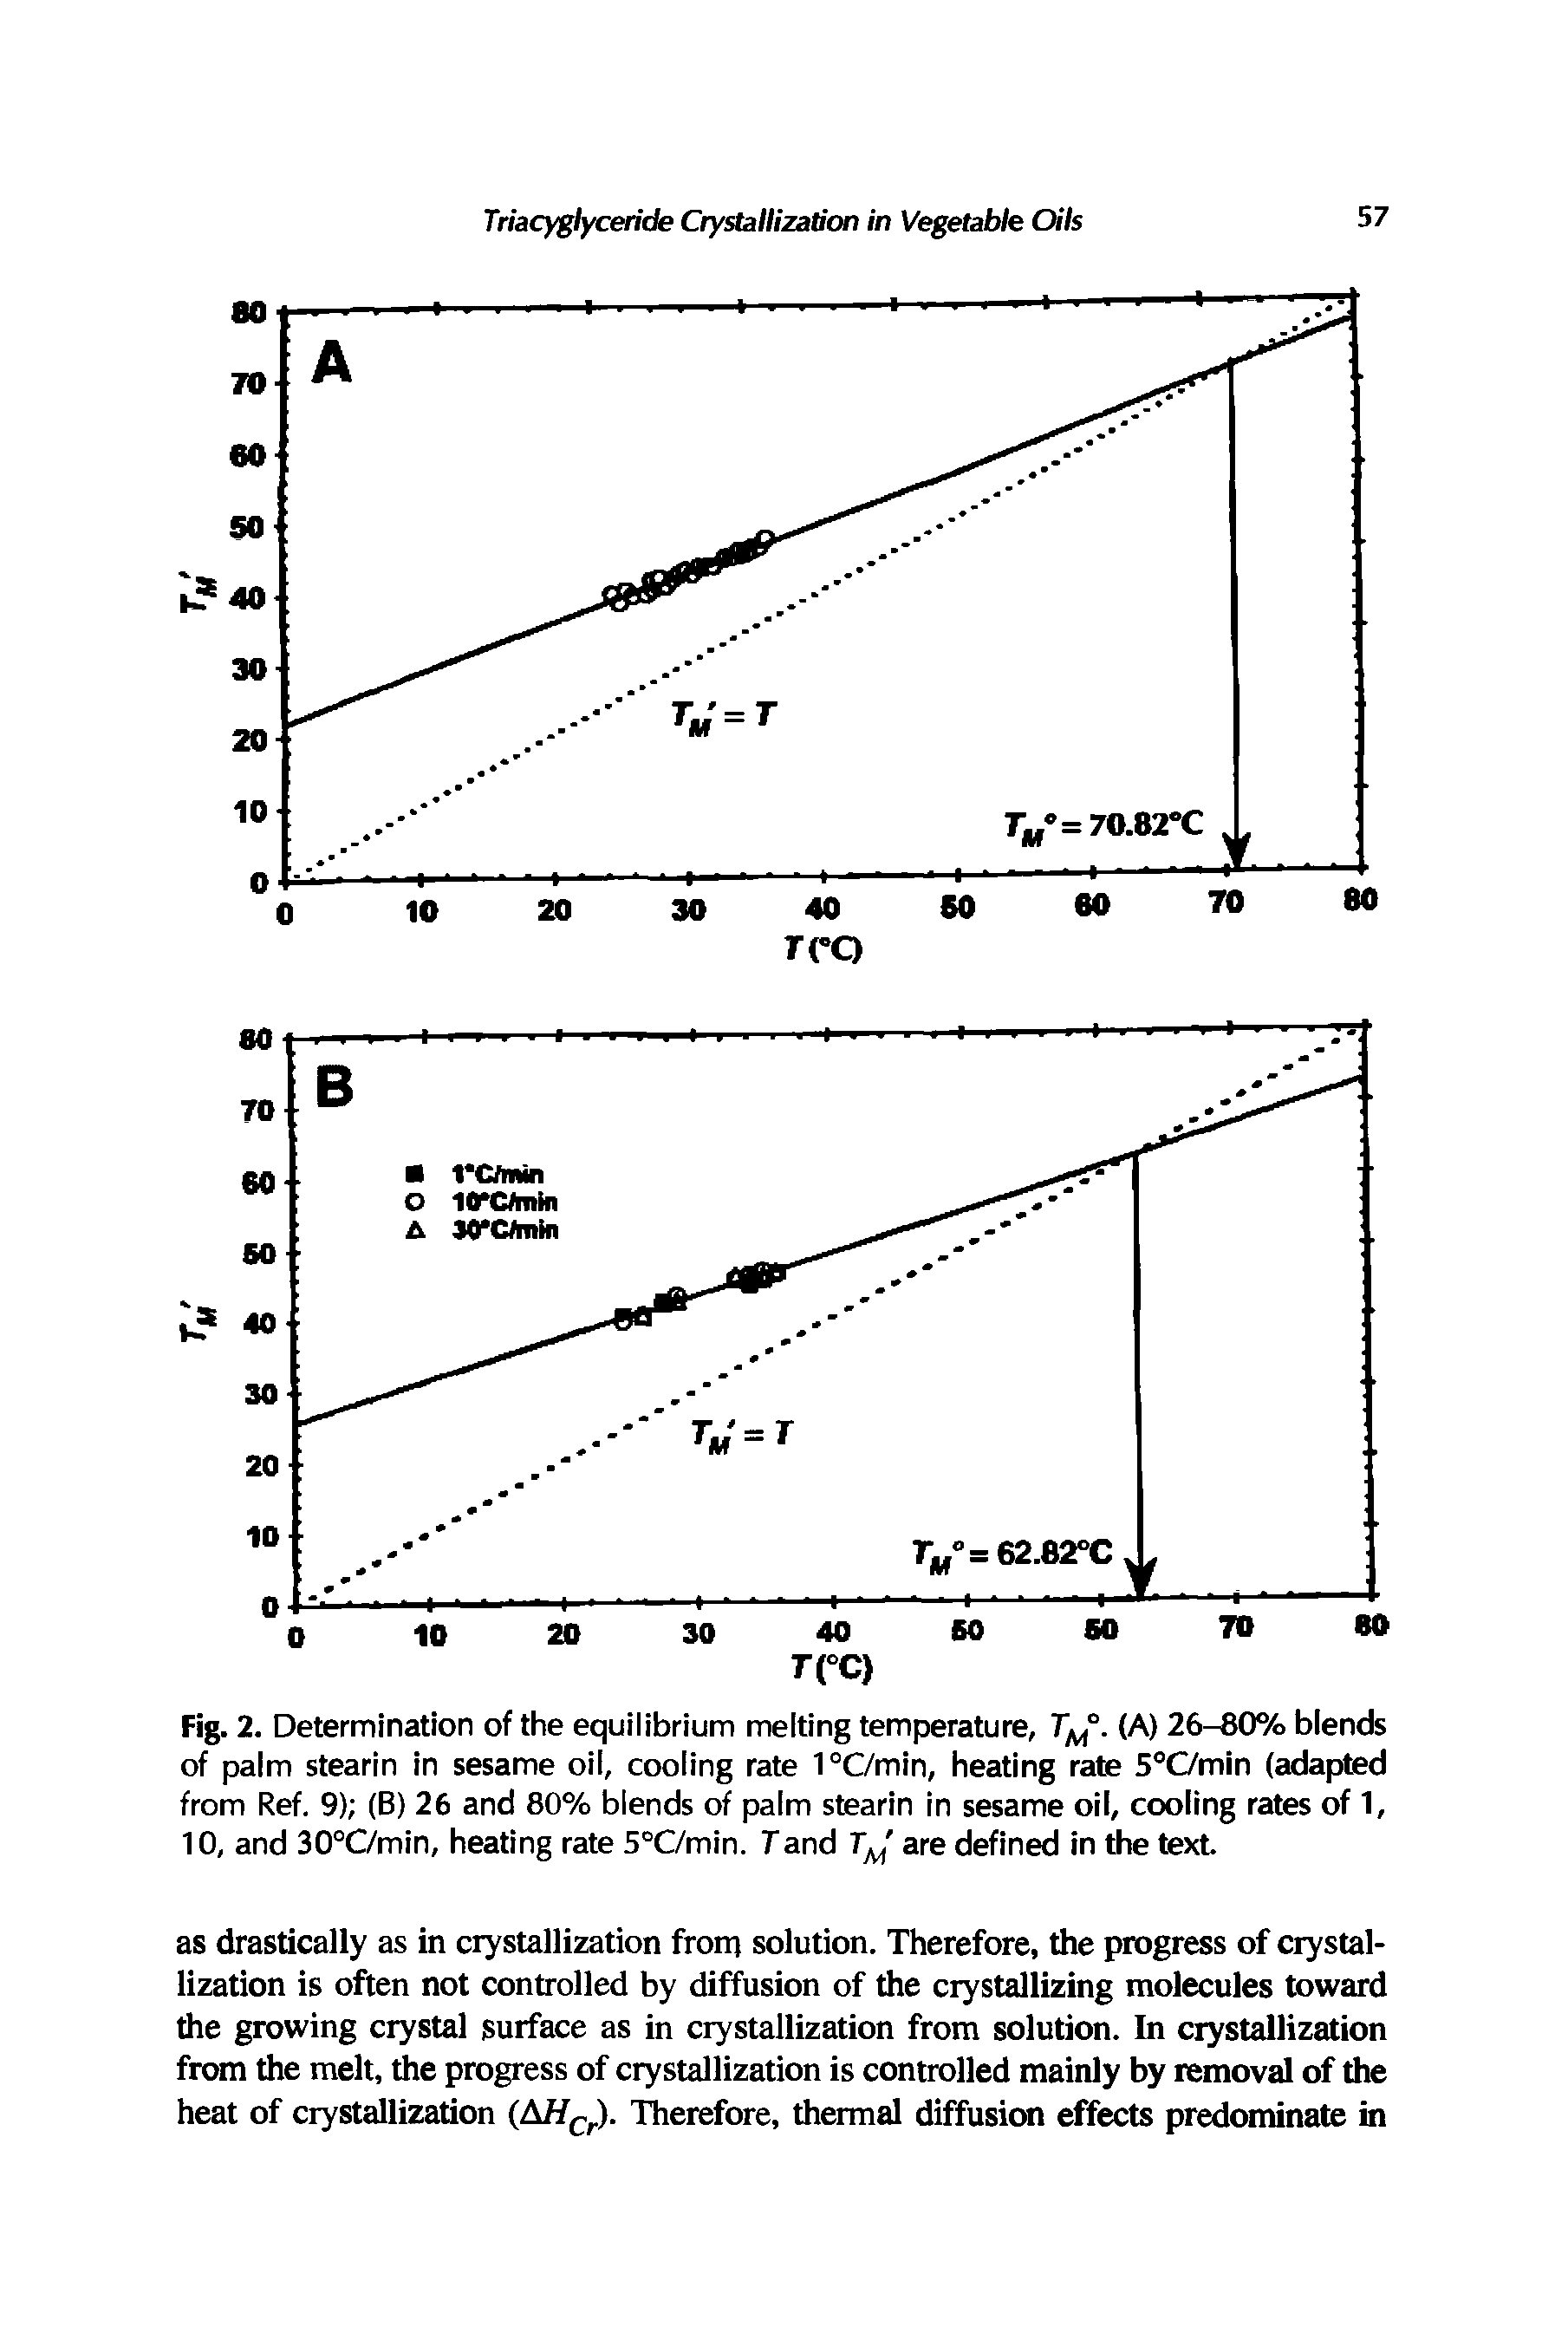 Fig. 2. Determination of the equilibrium melting temperature, T/ °. (A) 26-80% blends of palm stearin in sesame oil, cooling rate 1°C/min, heating rate 5°C7min (adapted from Ref. 9) (B) 26 and 80% blends of palm stearin in sesame oil, cooling rates of 1, 10, and 30°C/min, heating rate 5°C/min. land Tm are defined in the text...